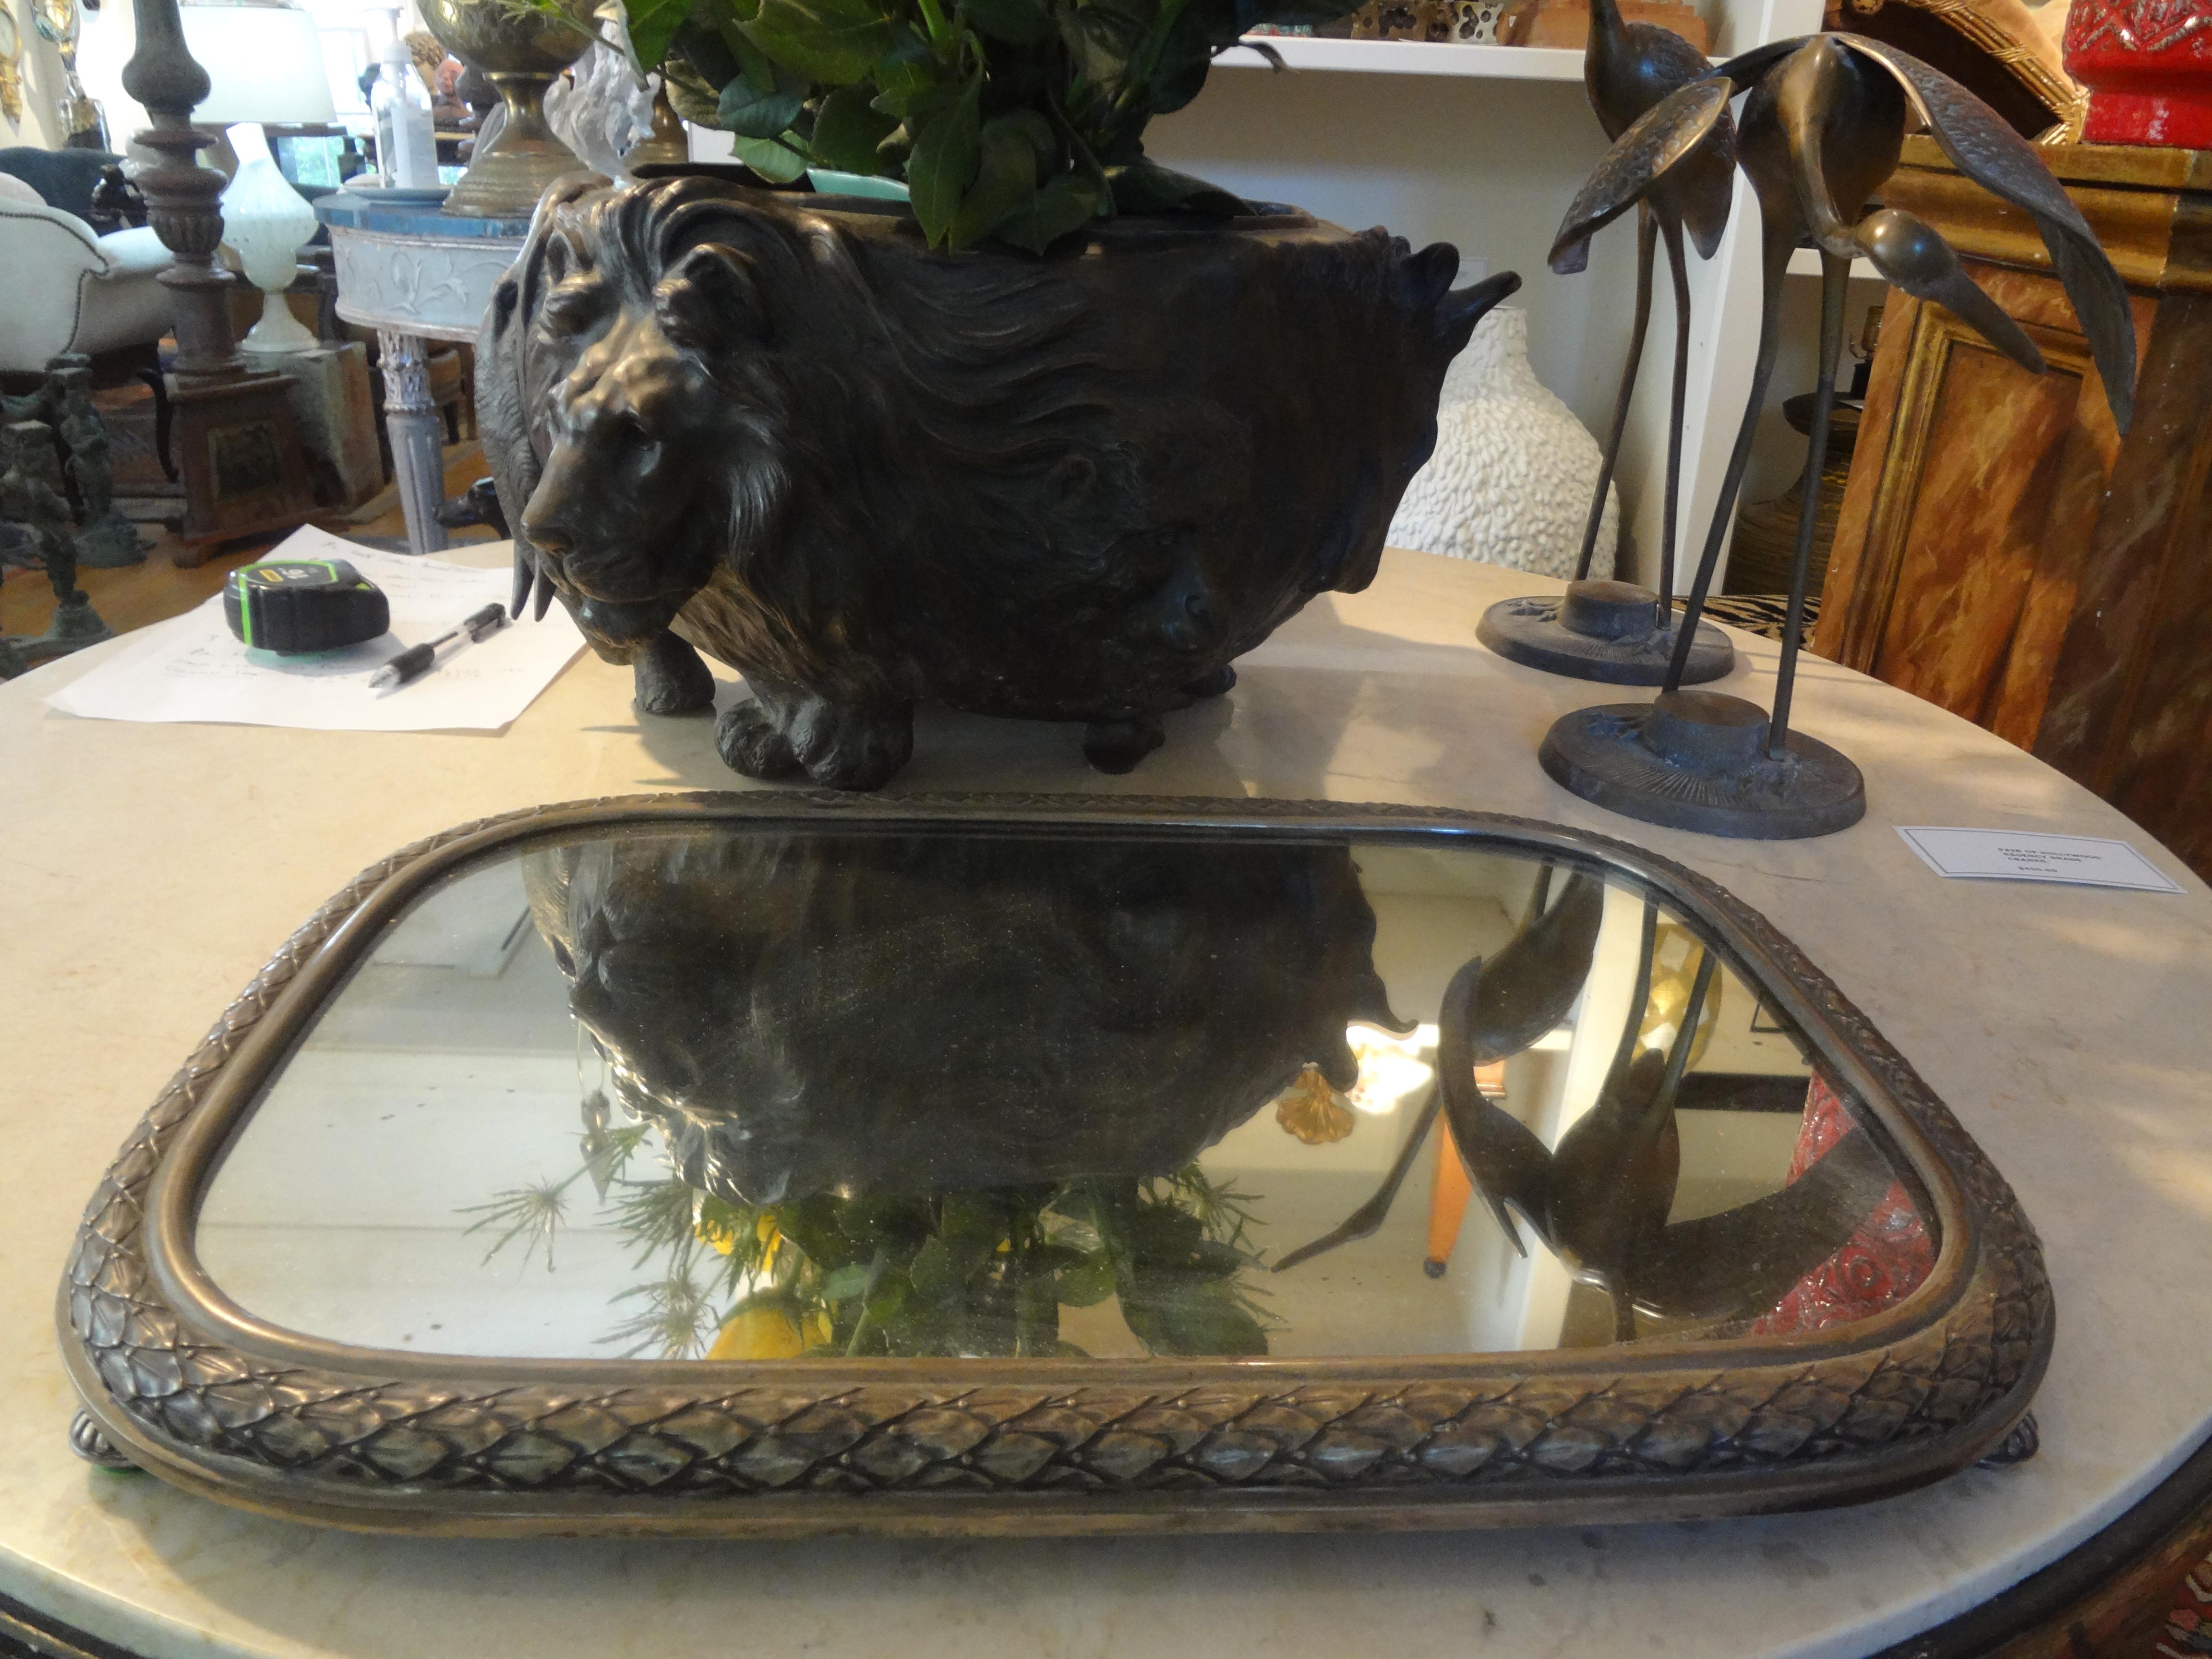 Antique French Louis XVI style silverplate mirrored plateau or tray. This stunning French silver plate tray would look great on a cocktail table showcasing a prized possession or for use in a ladies bathroom or dressing table for cosmetics or a